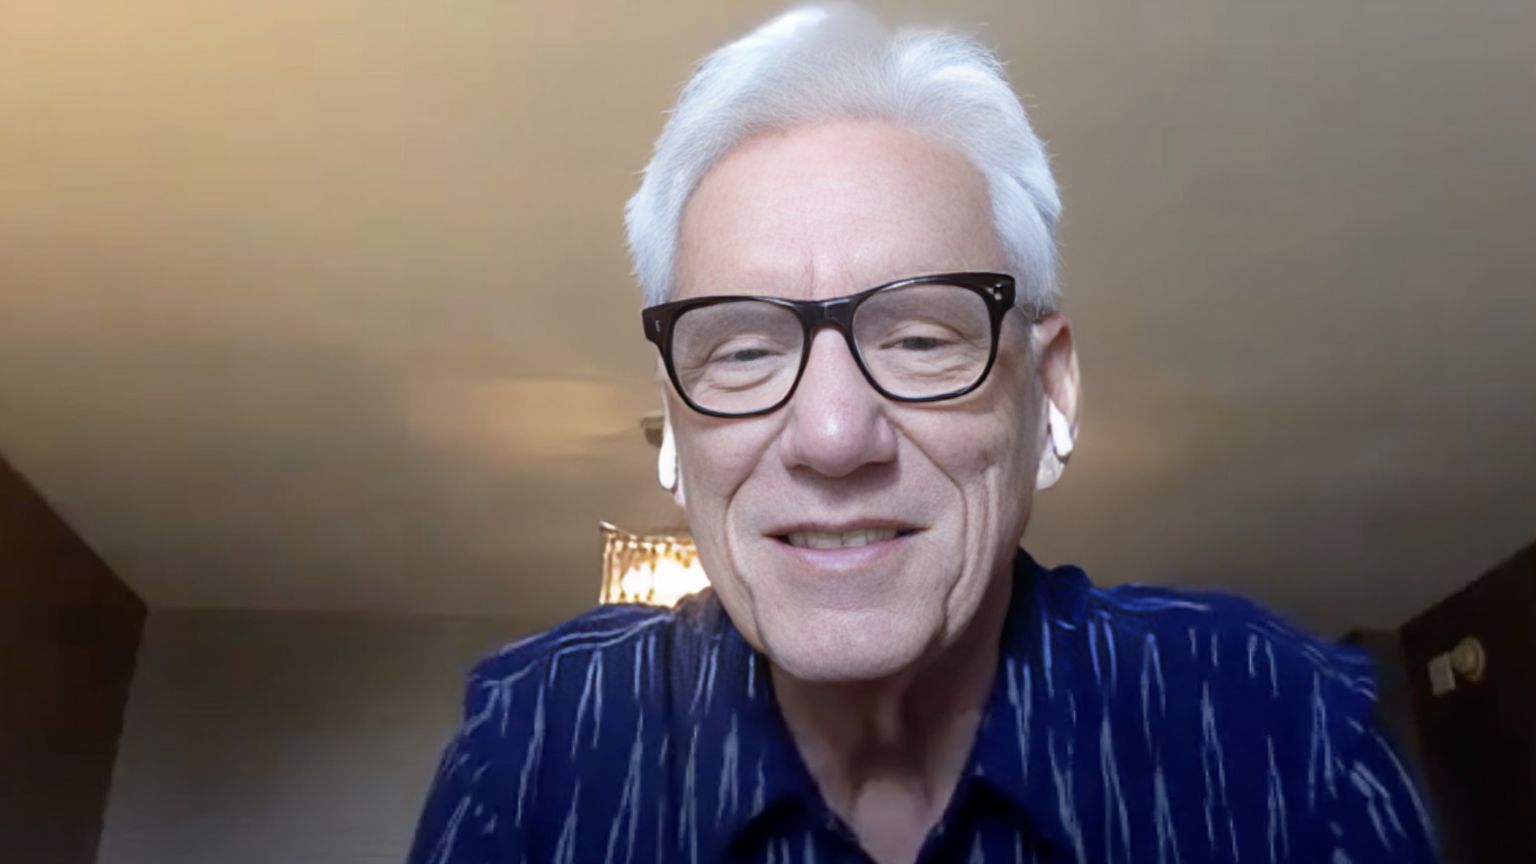 Actor James Woods considers lawsuit against DNC for reporting his tweets to be censored